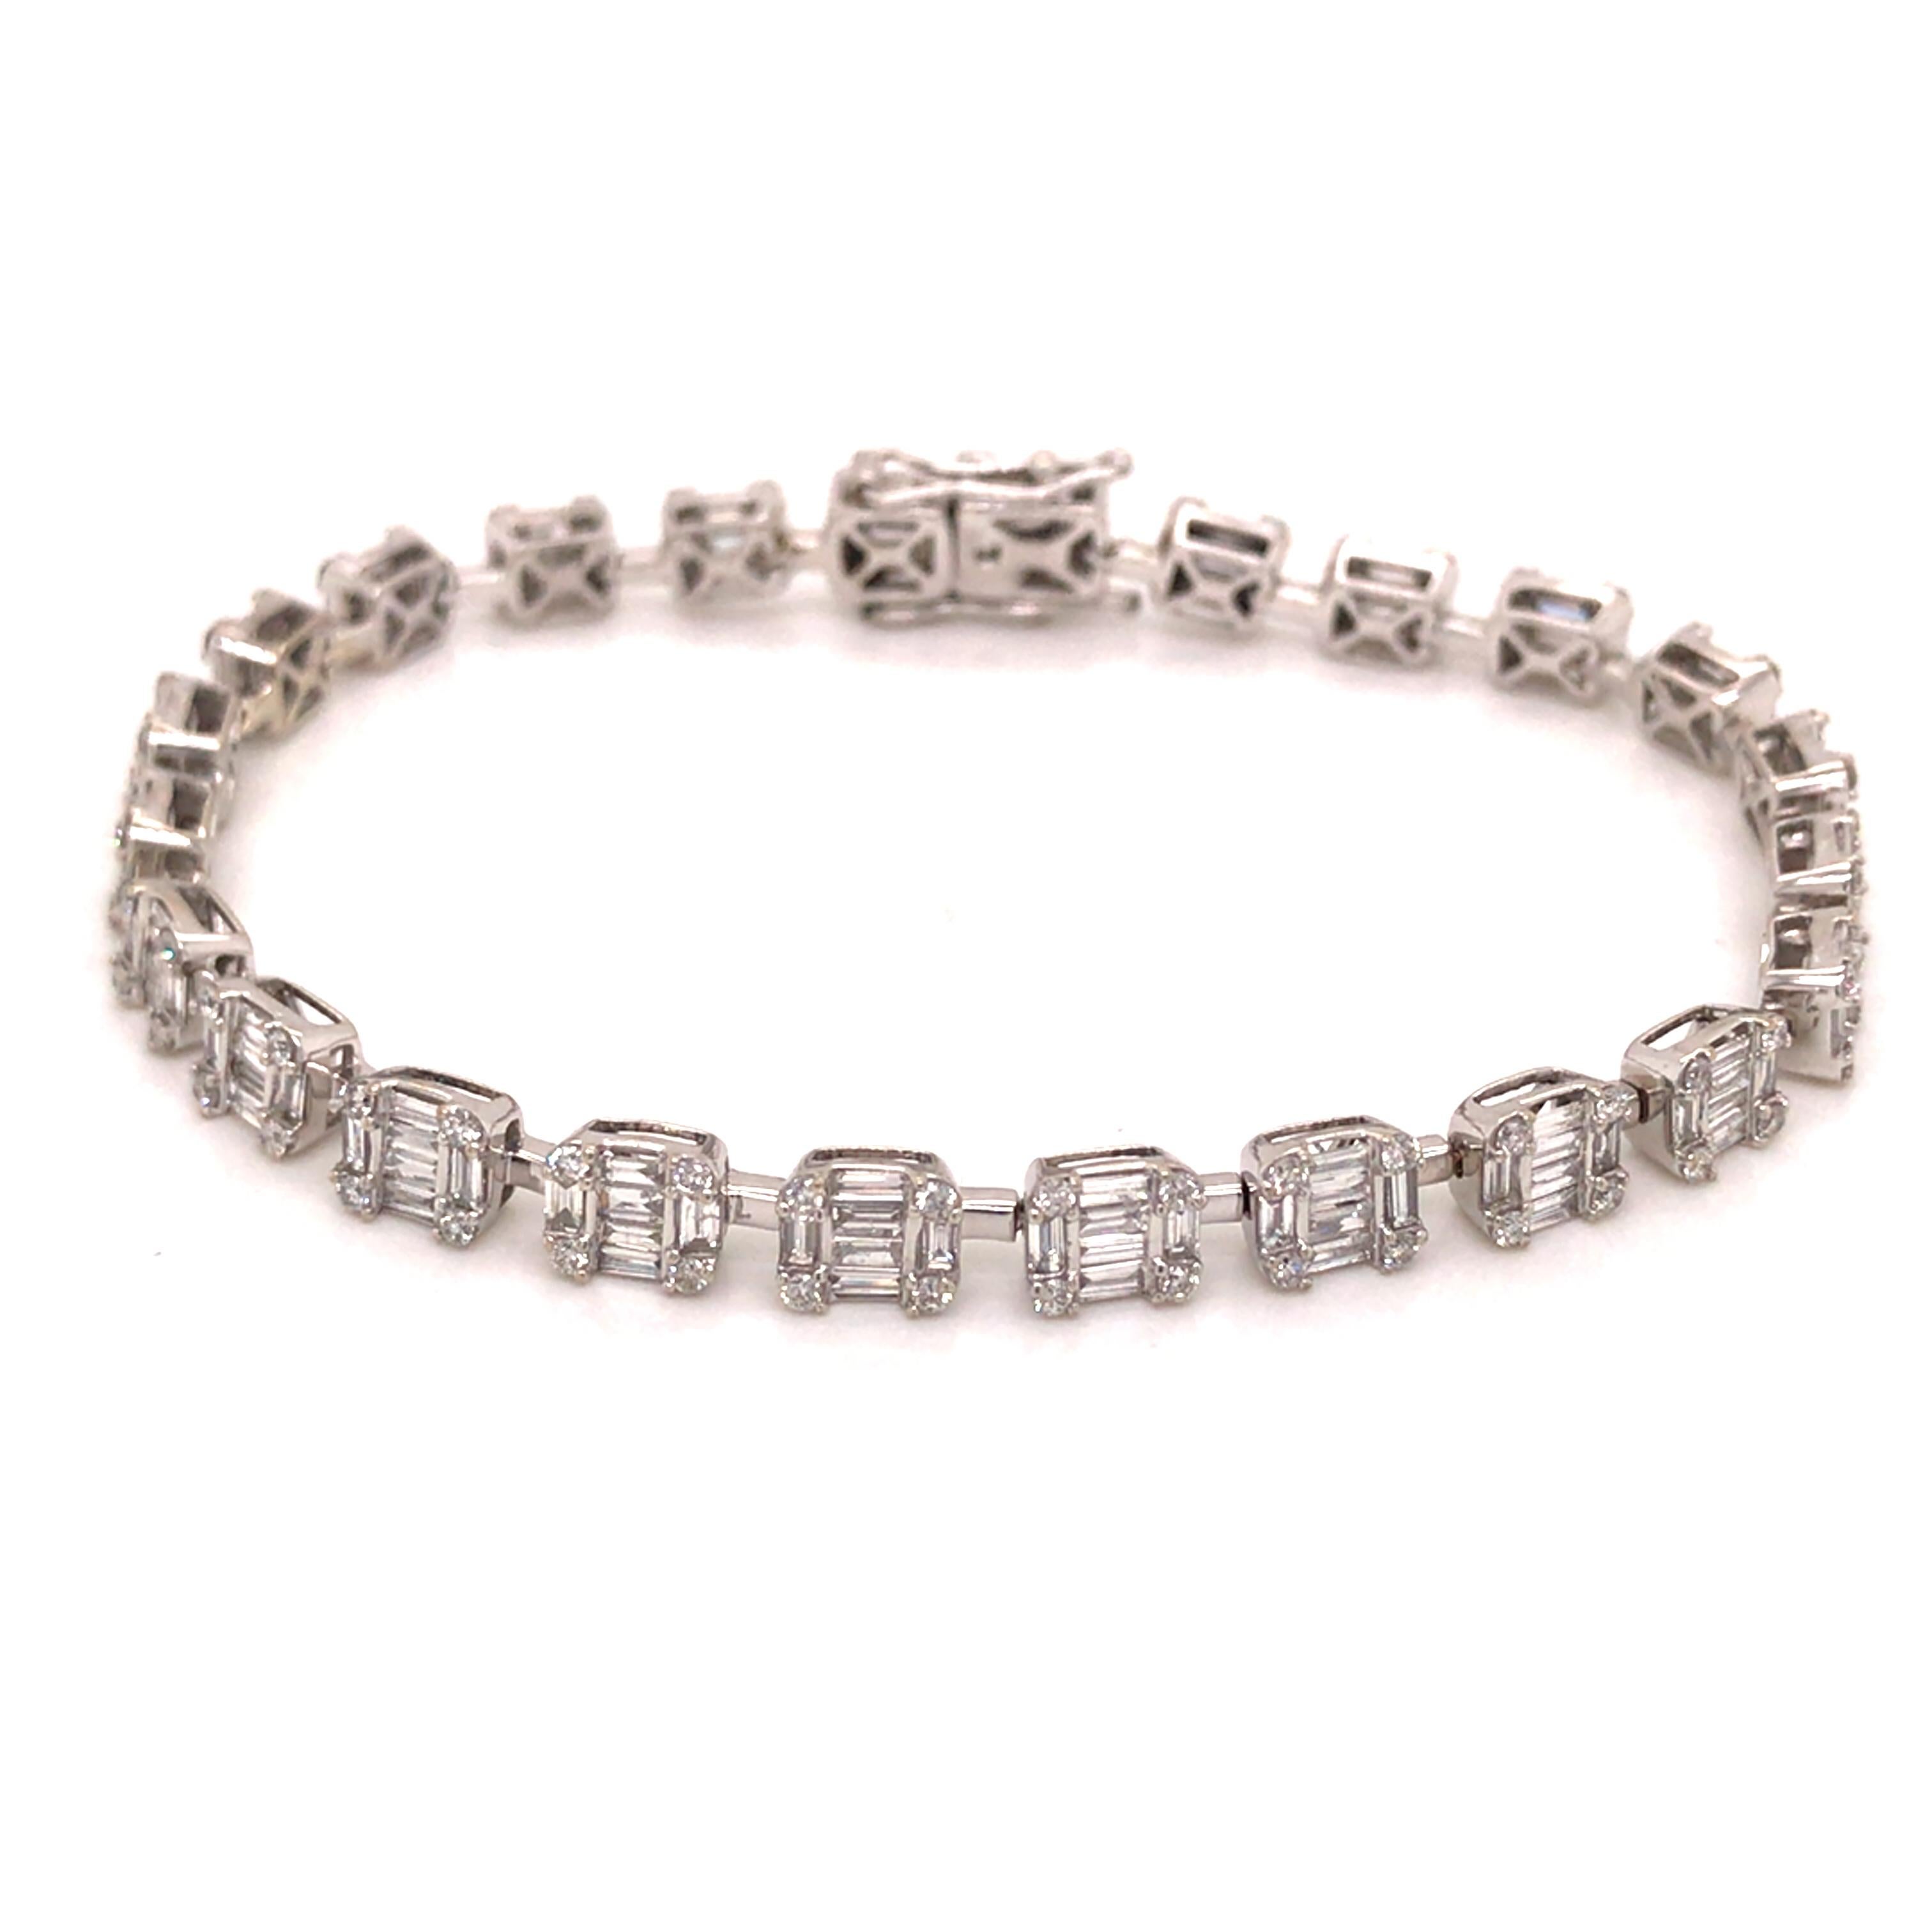 Round and Baguette Diamond Bracelet in 14K White Gold.  Round Brilliant Cut and Baguette Diamonds weighing 3.34 carat total weight, G-H in color and VS-SI in clarity are expertly set in clusters.  The Bracelet measures 7 inch in length and 3/16 inch